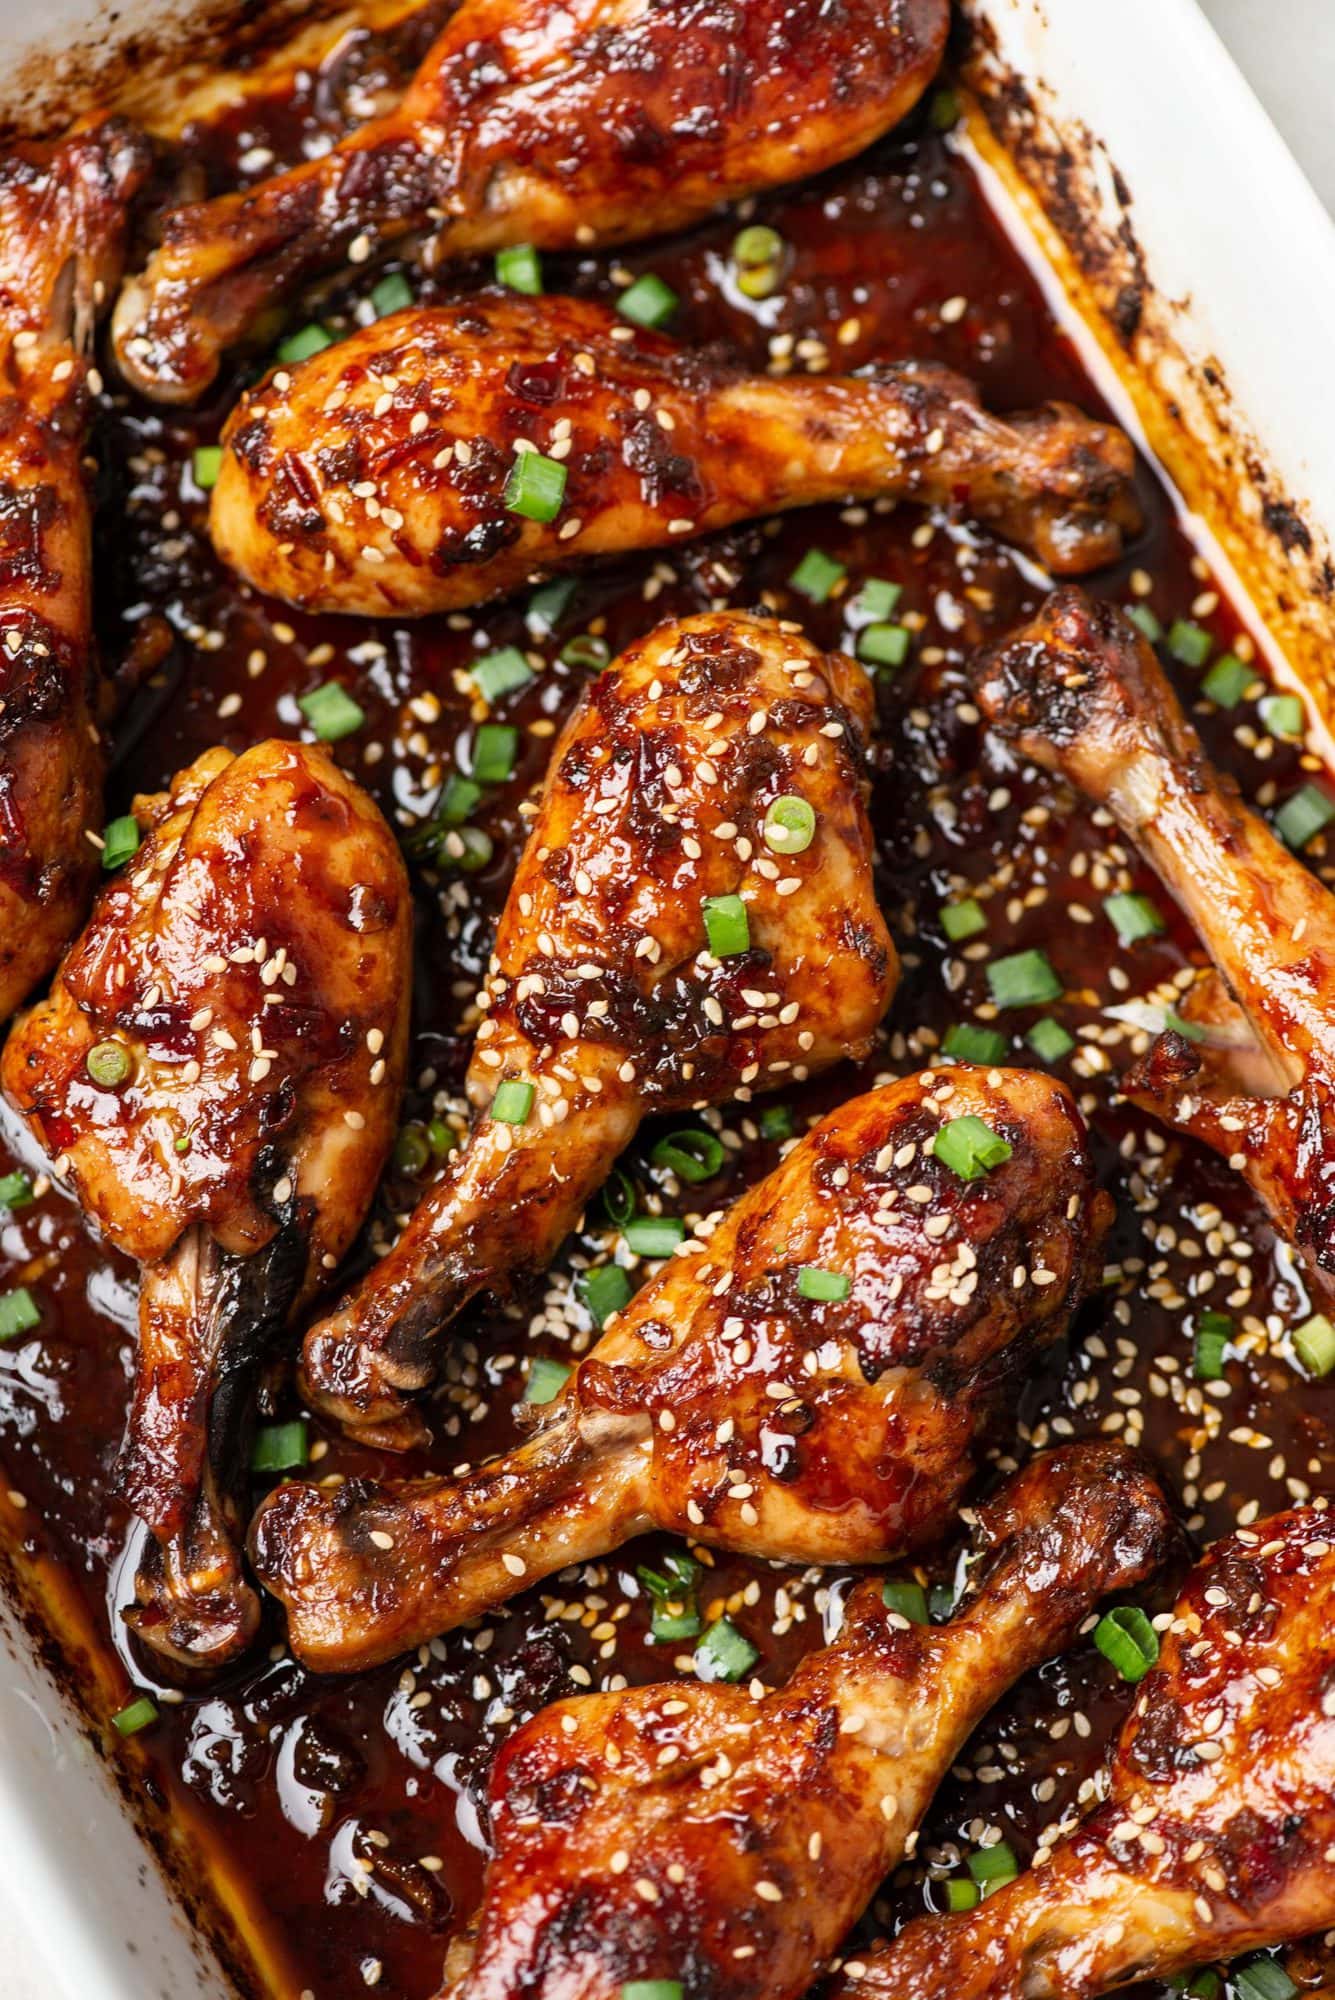 Chicken Drumsticks baked in a coat of Honey, Soy sauce, chili sauce giving a caramelized glaze in a pan.